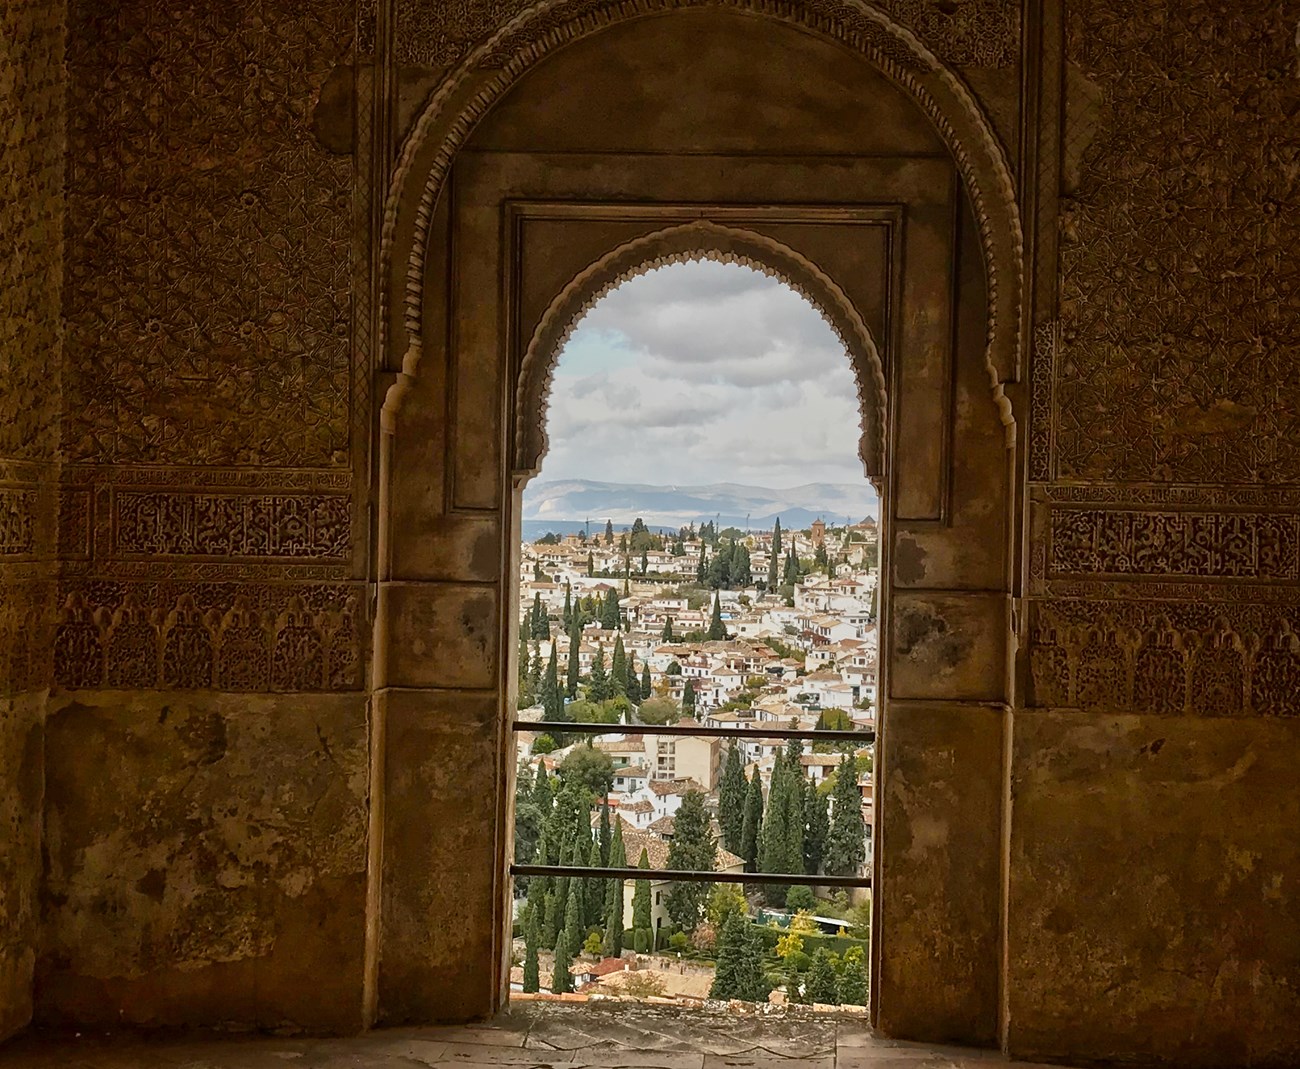 View of Spanish town outside of an ornate window with decorative walls. The town has houses with orange roofs and white stucco and trees are interspersed. Mountains are present in the horizon.